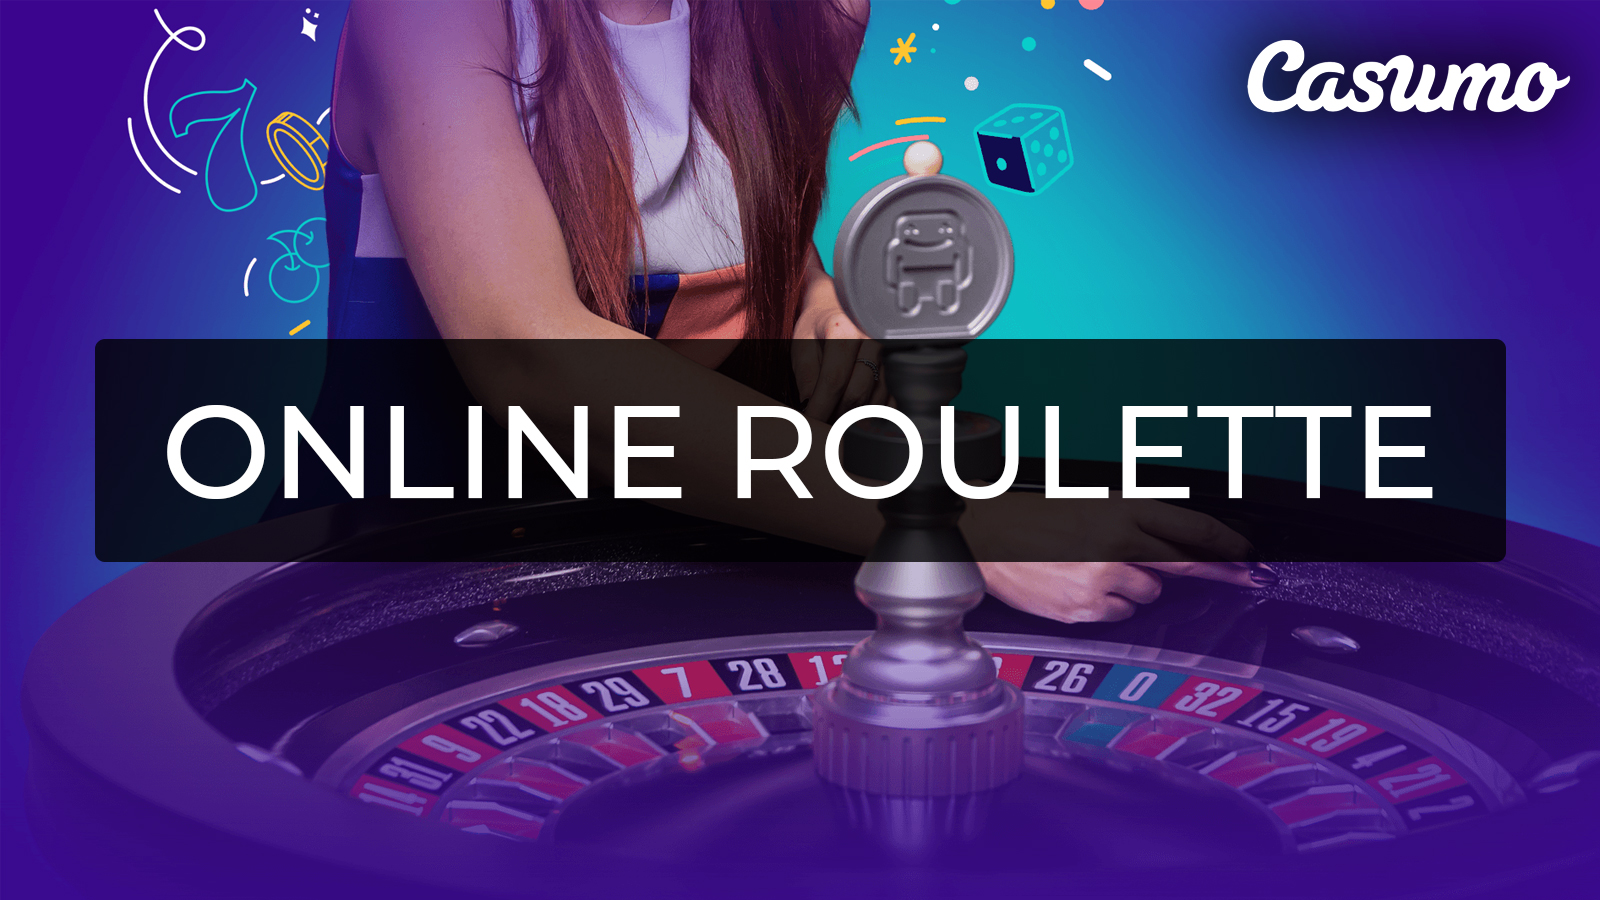 Sign up for Casumo casino and play online roulette games.